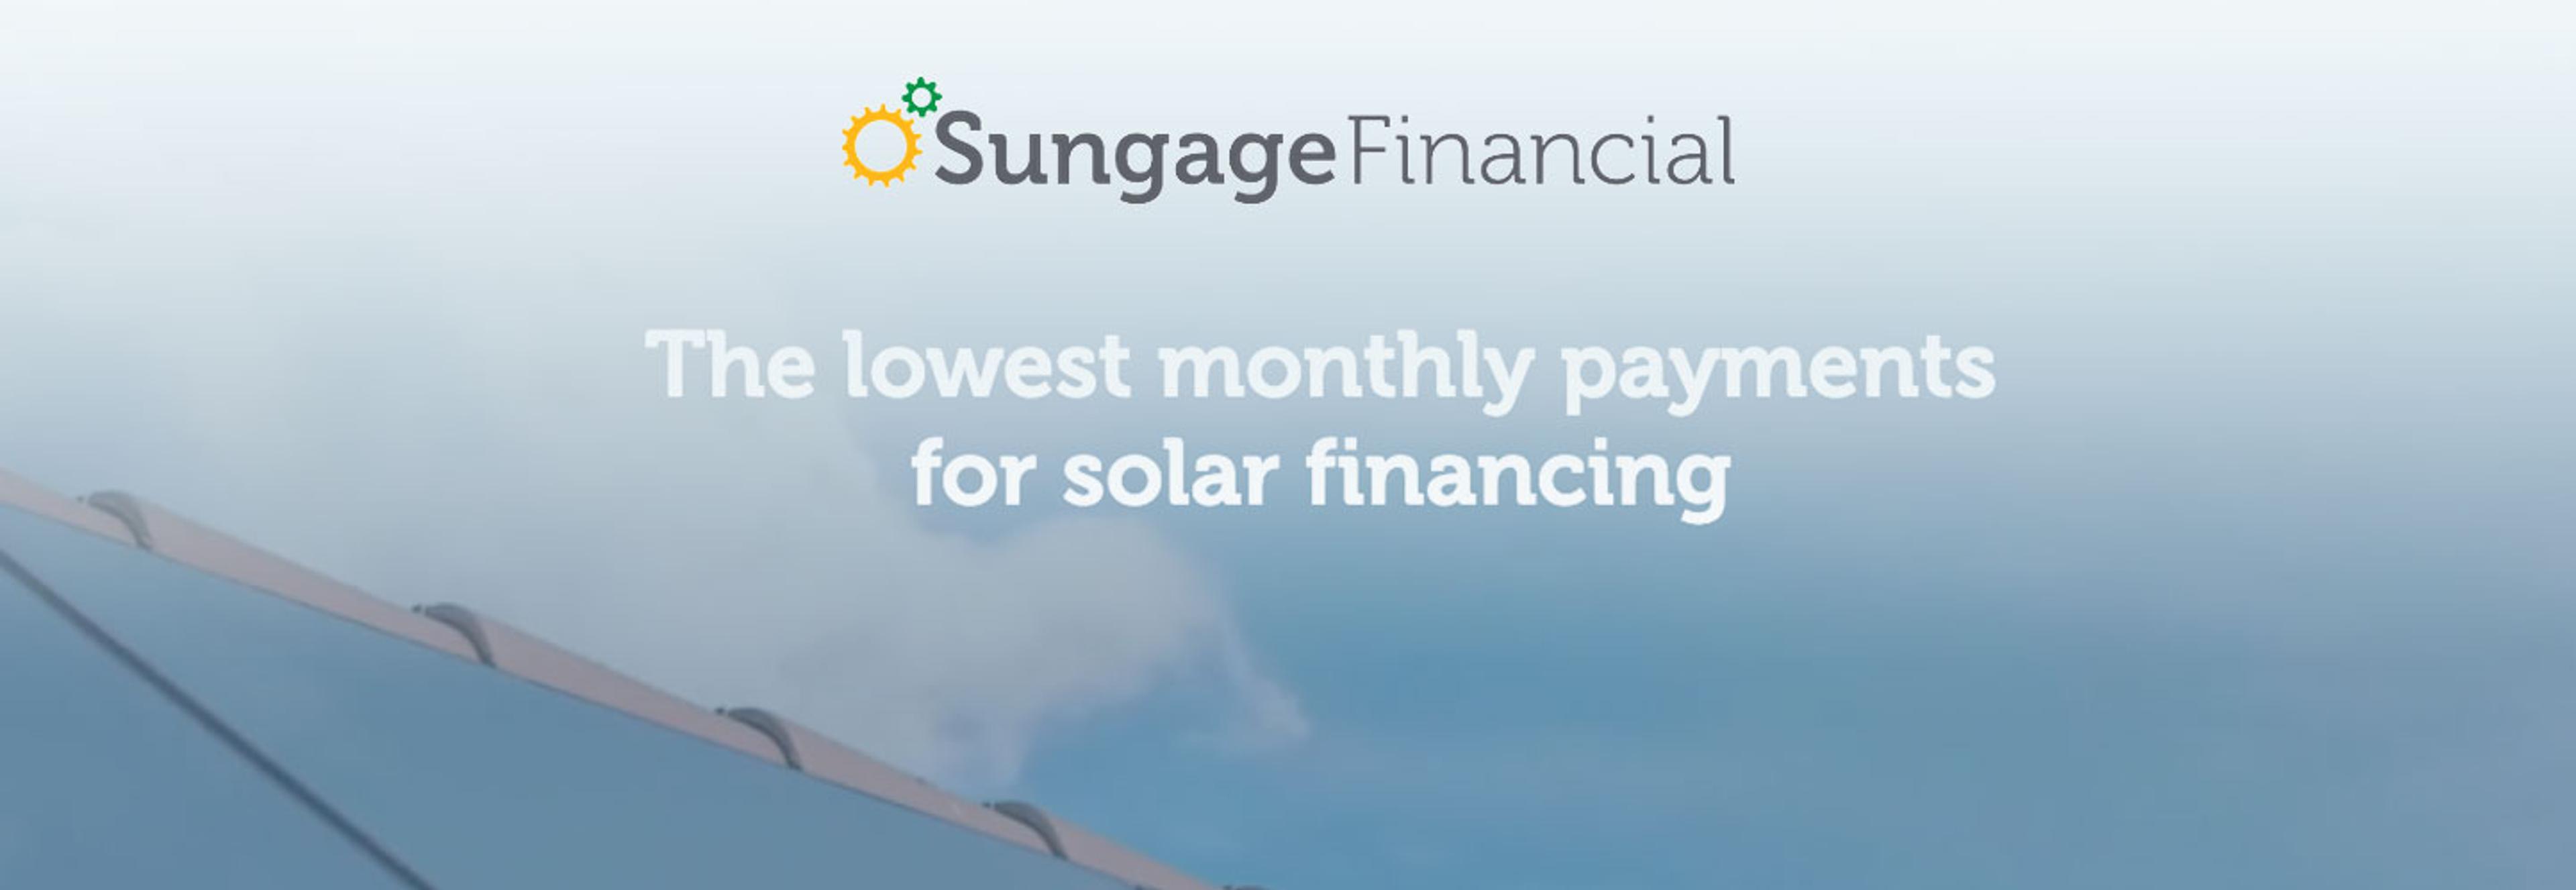 Sungage Financial: Offering the lowest monthly payments for solar financing.